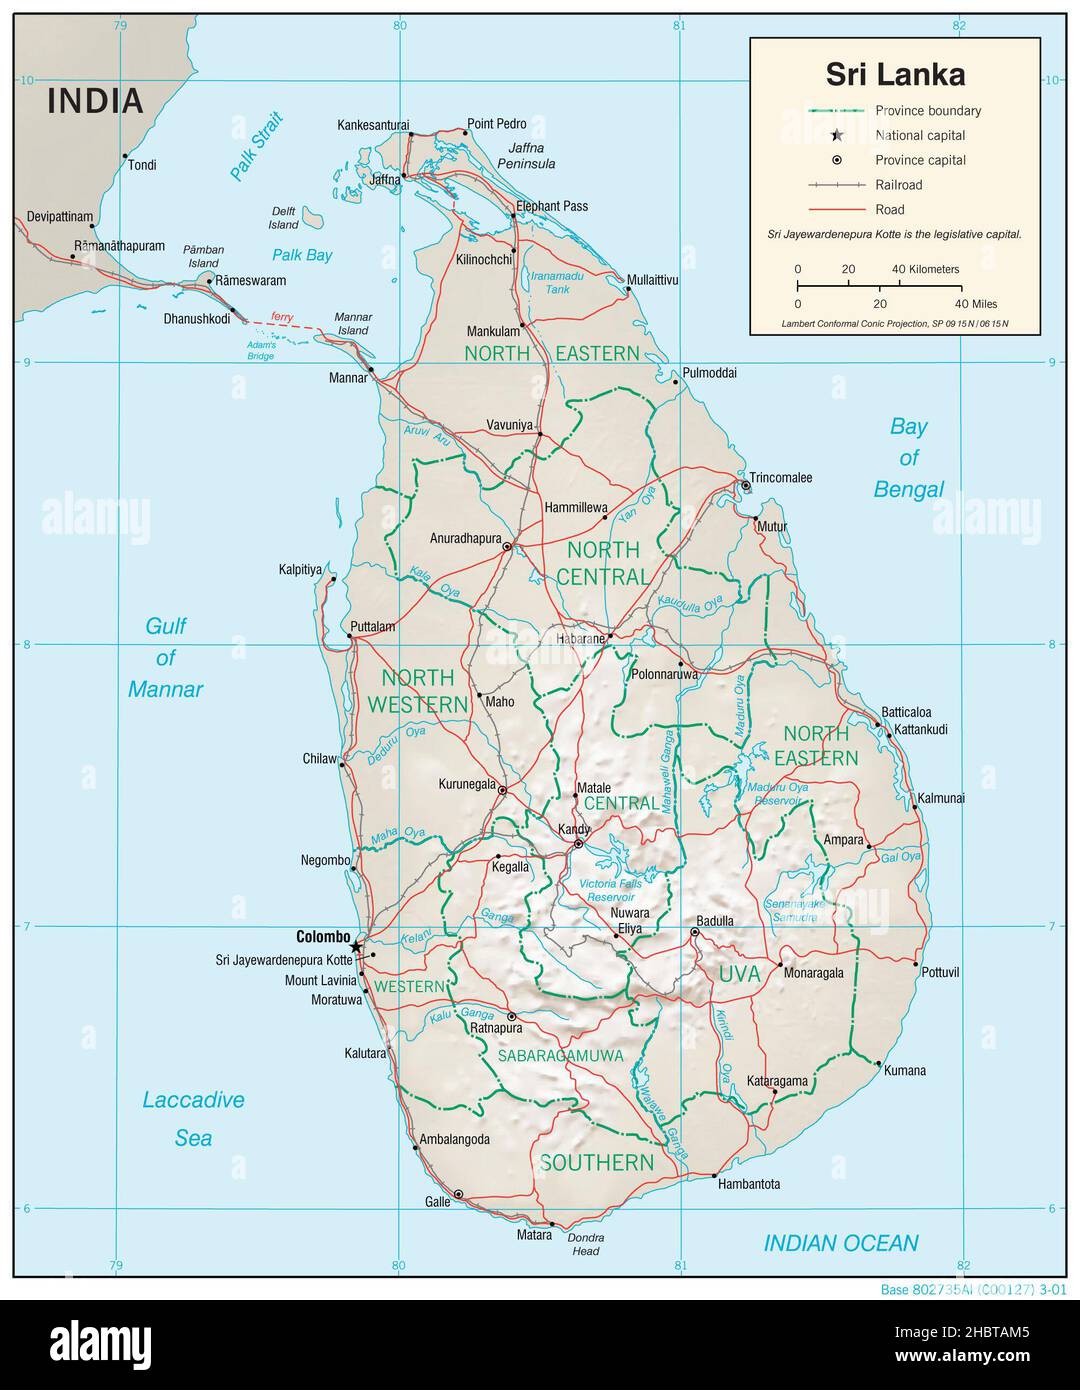 Topographic map of Sri Lanka (shaded relief), 2001 Stock Photo